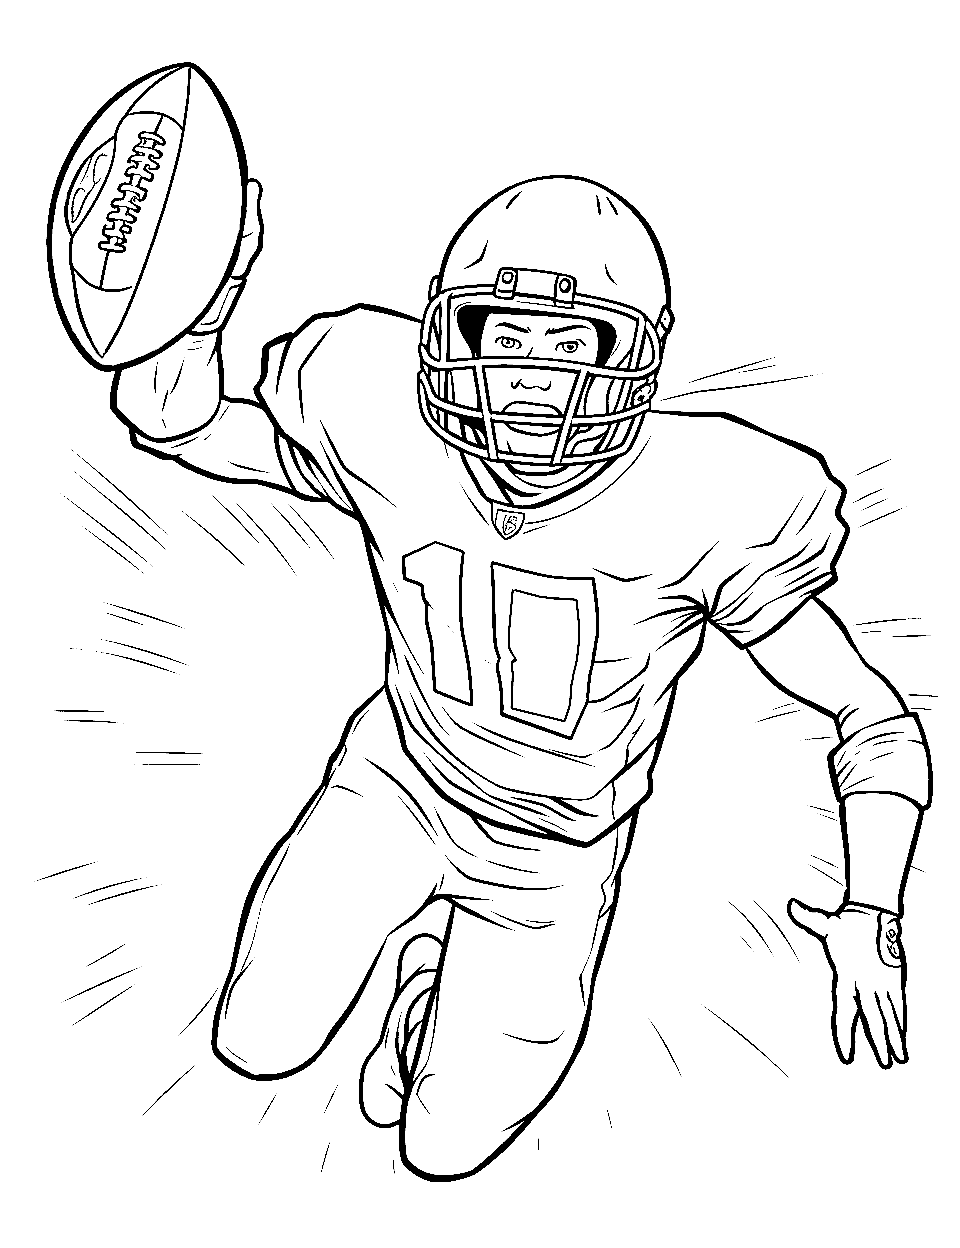 Scoring Moment Coloring Page - A player on the verge of scoring a goal.